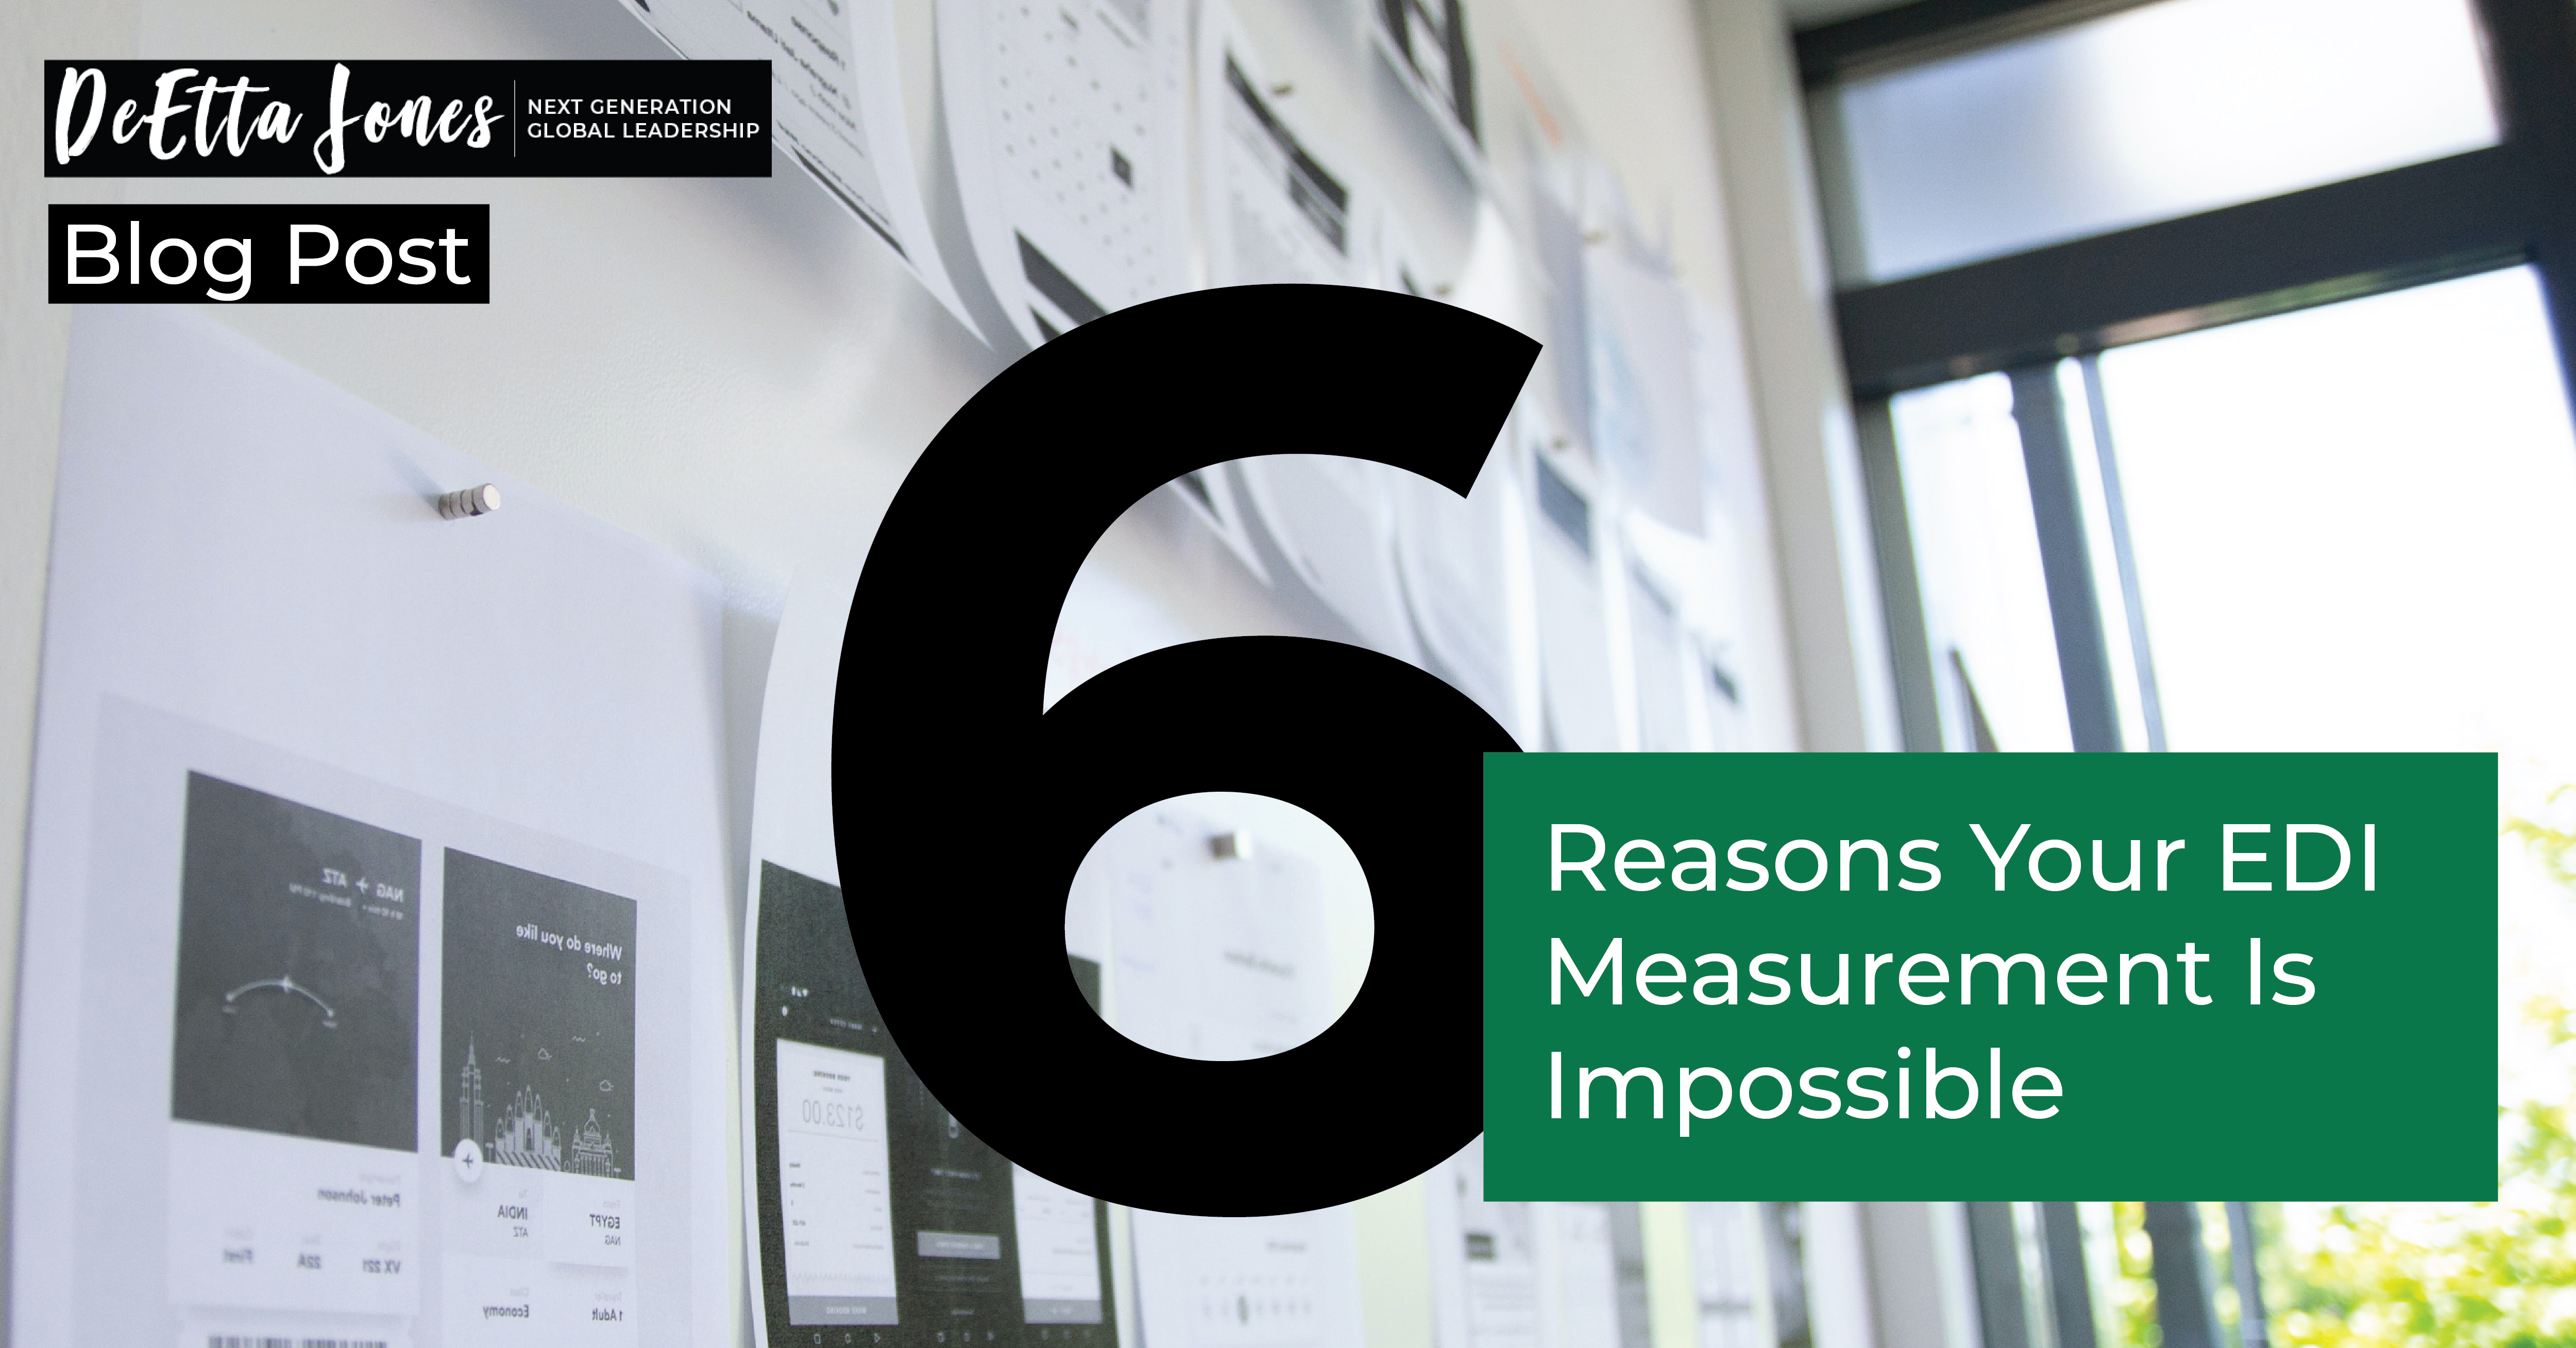 6 Reasons Your EDI Measurement is Impossible